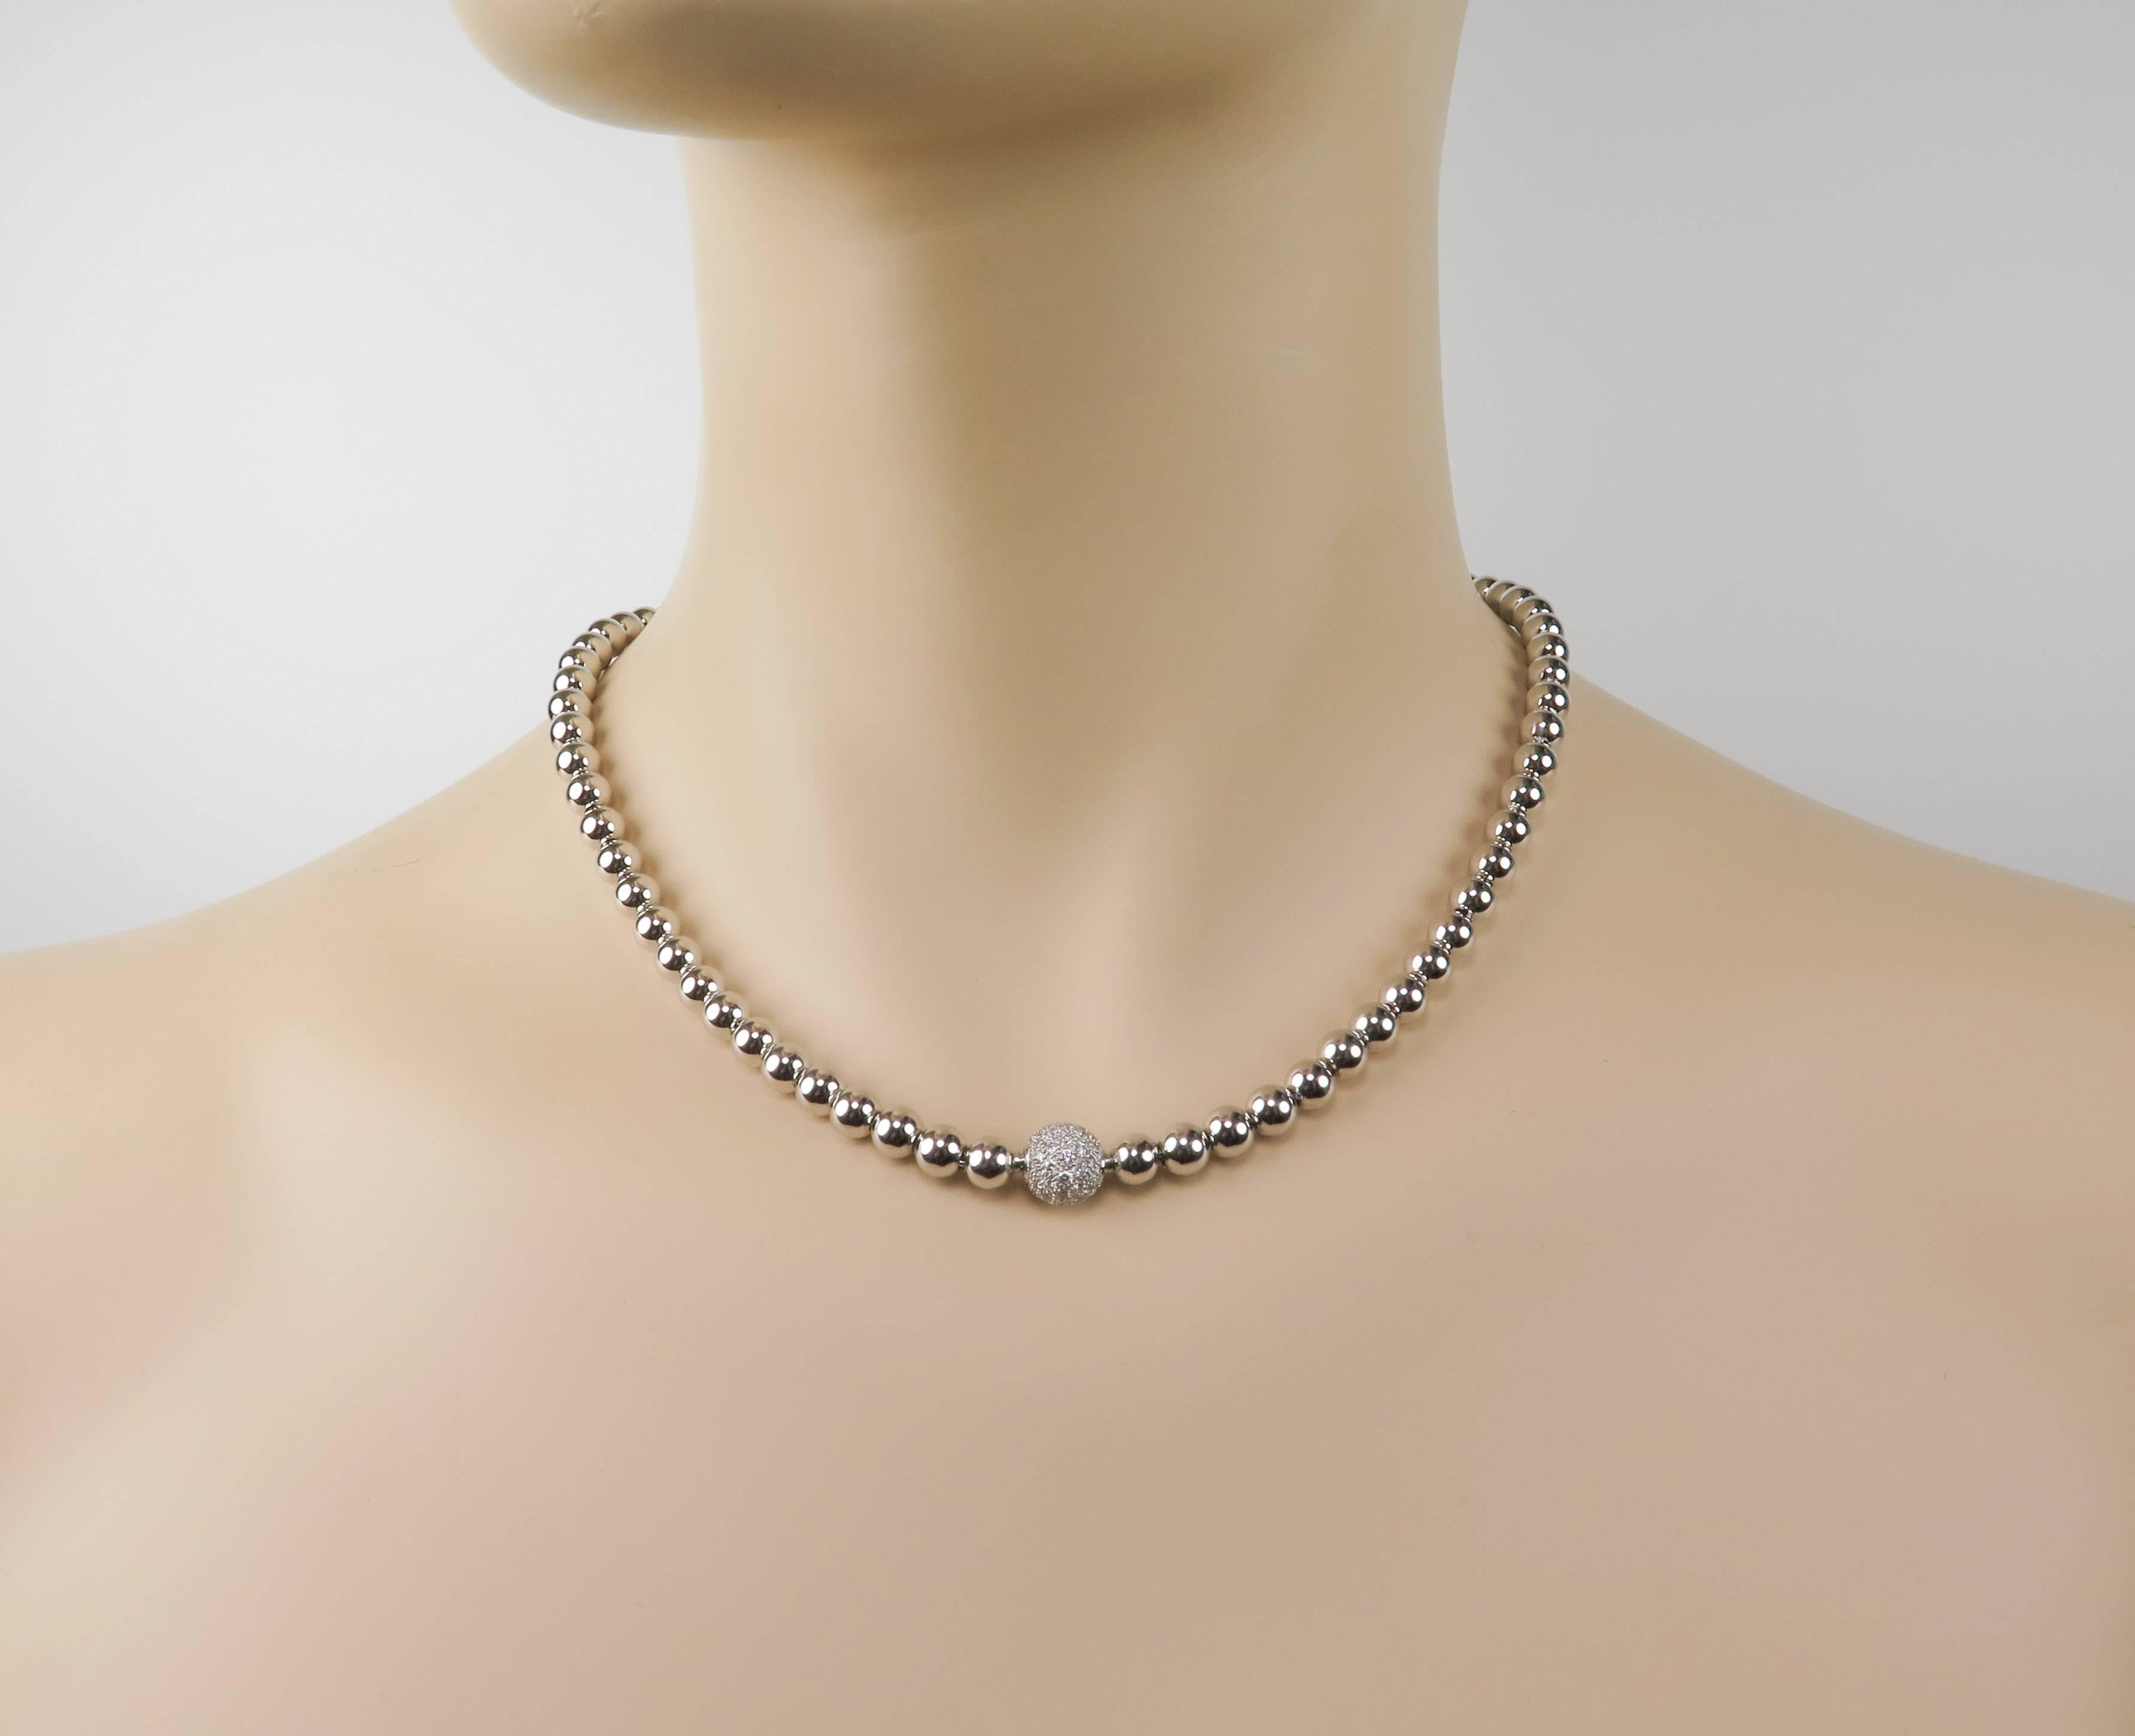 Women's Gold Necklace with Diamond Pave Center